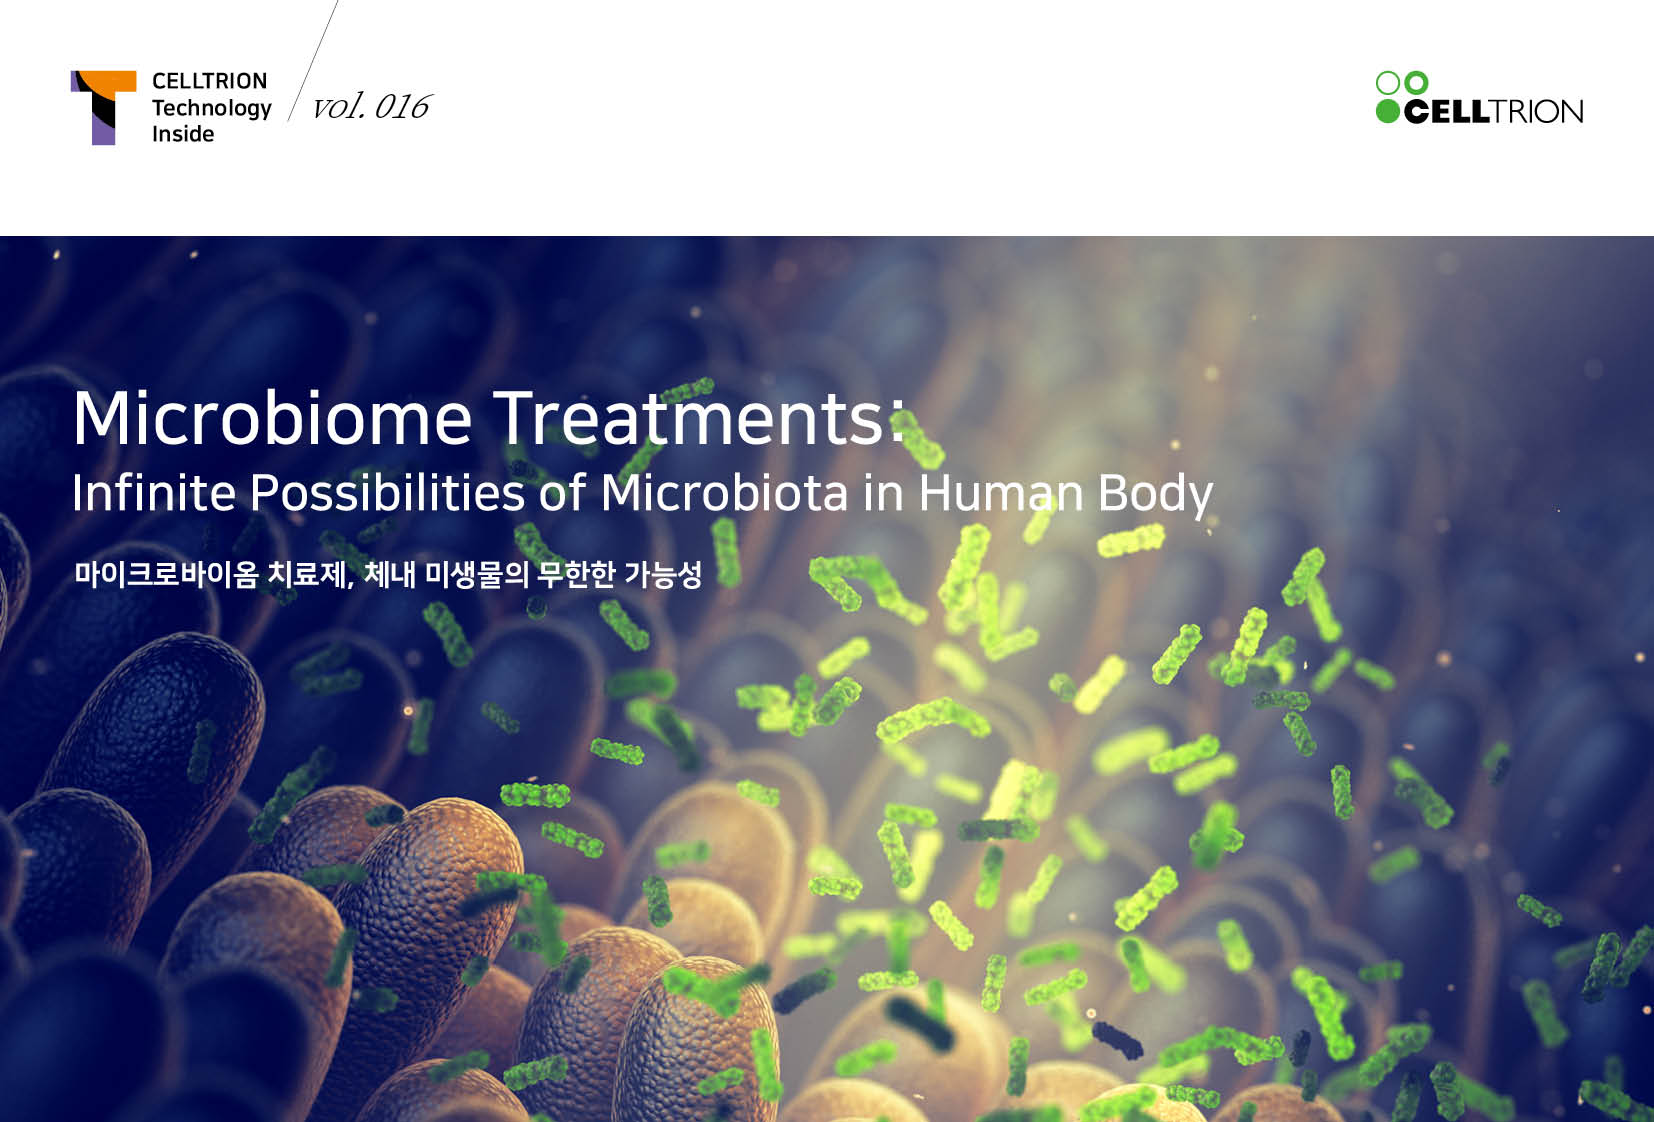 Microbiome treatments Infinite possibilities of microbiota in human body